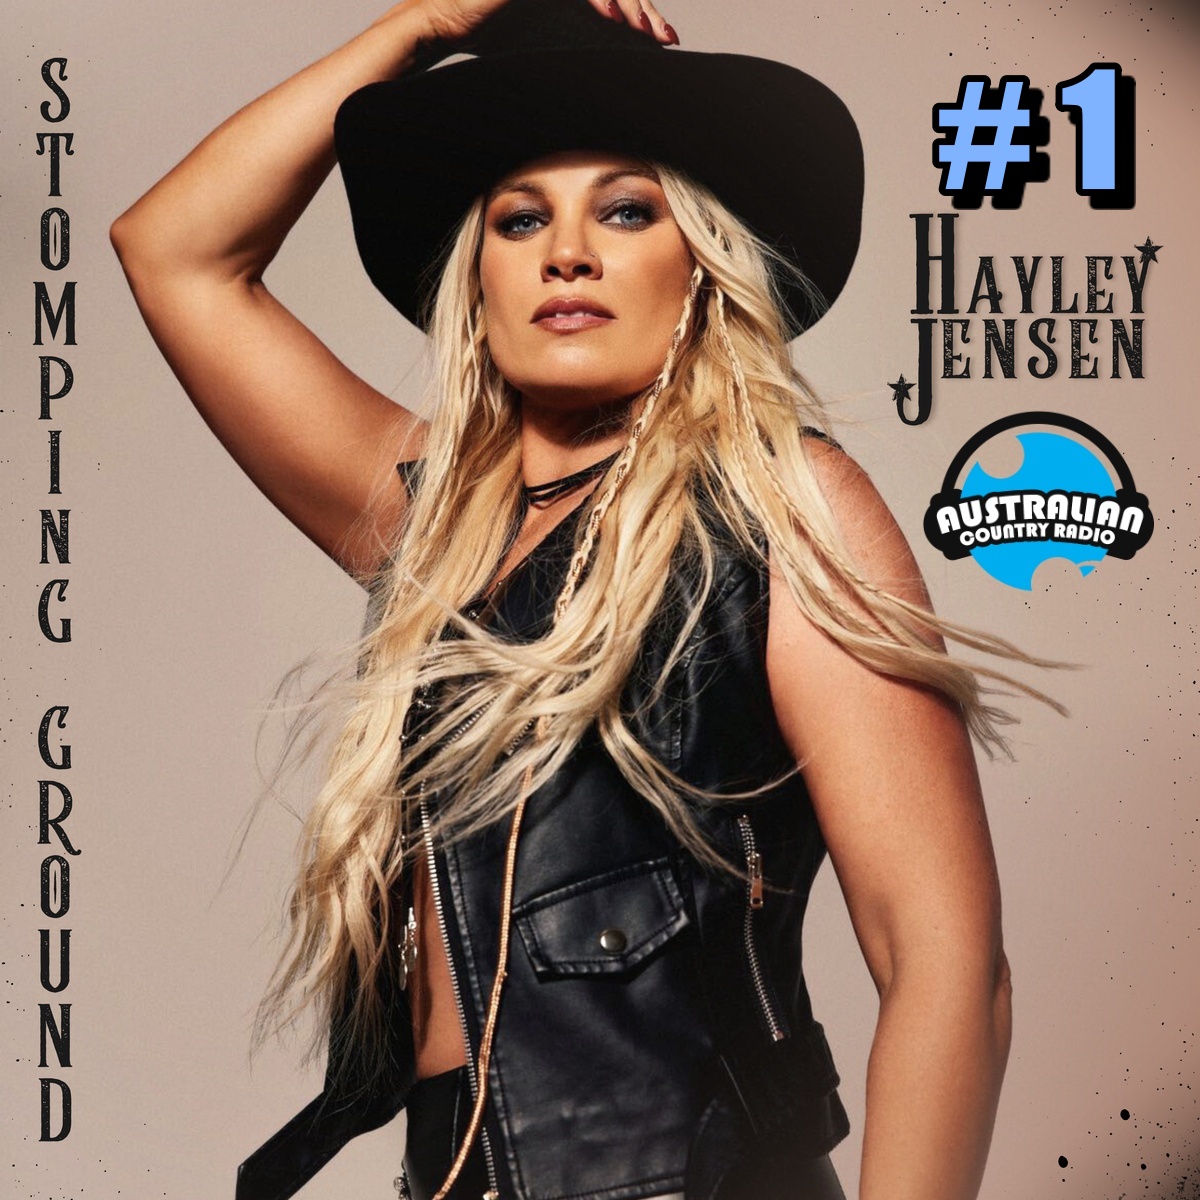 number 1 this week on Australia's Most influential Country Music chart Stomping Ground by Hayley Jensen @thehayleyjensen @tunein